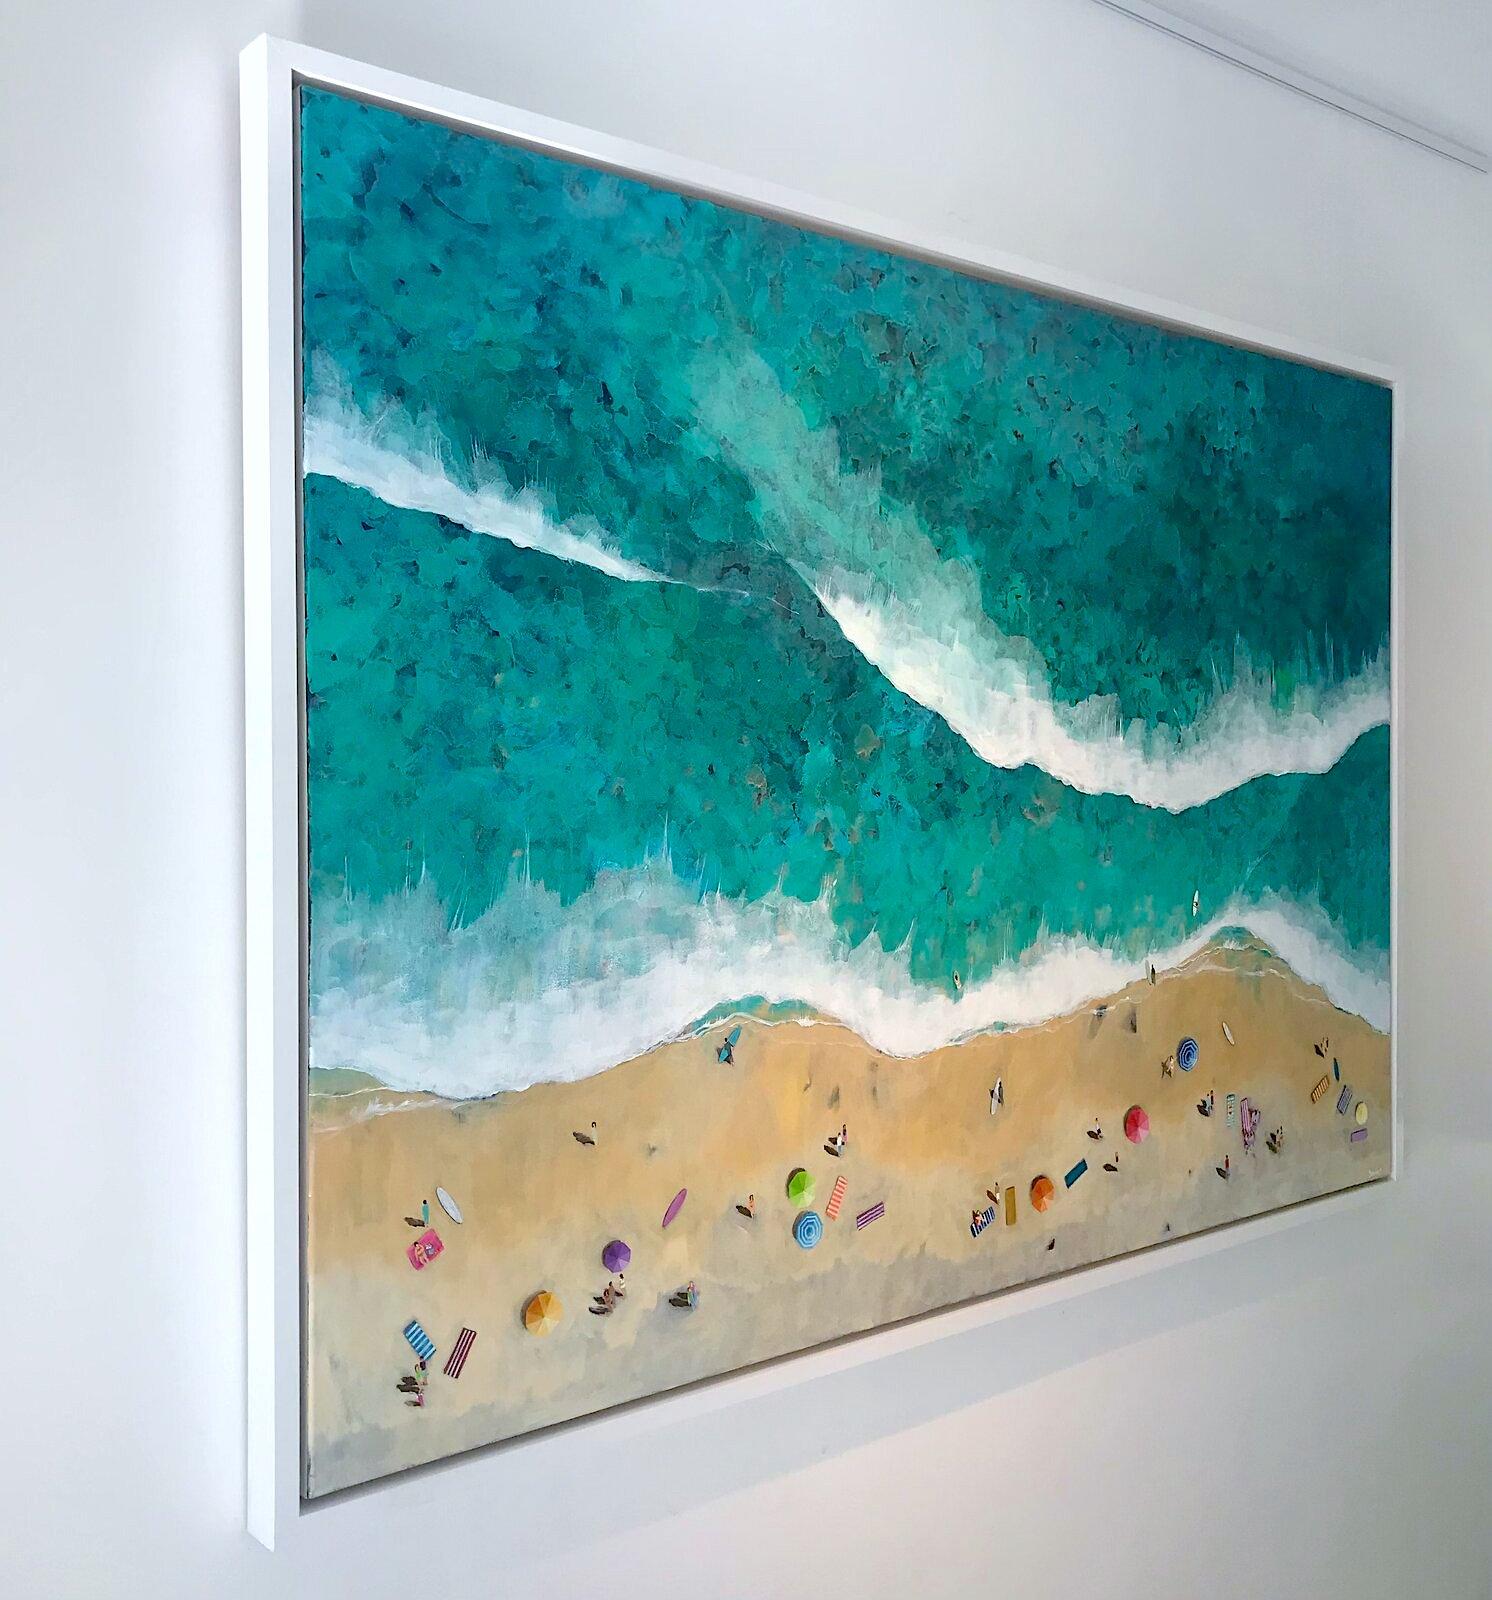 The Big Turquoise Wave-ORIGINAL Impressionism seascape painting-contemporary Art - Painting by Lenny Cornforth